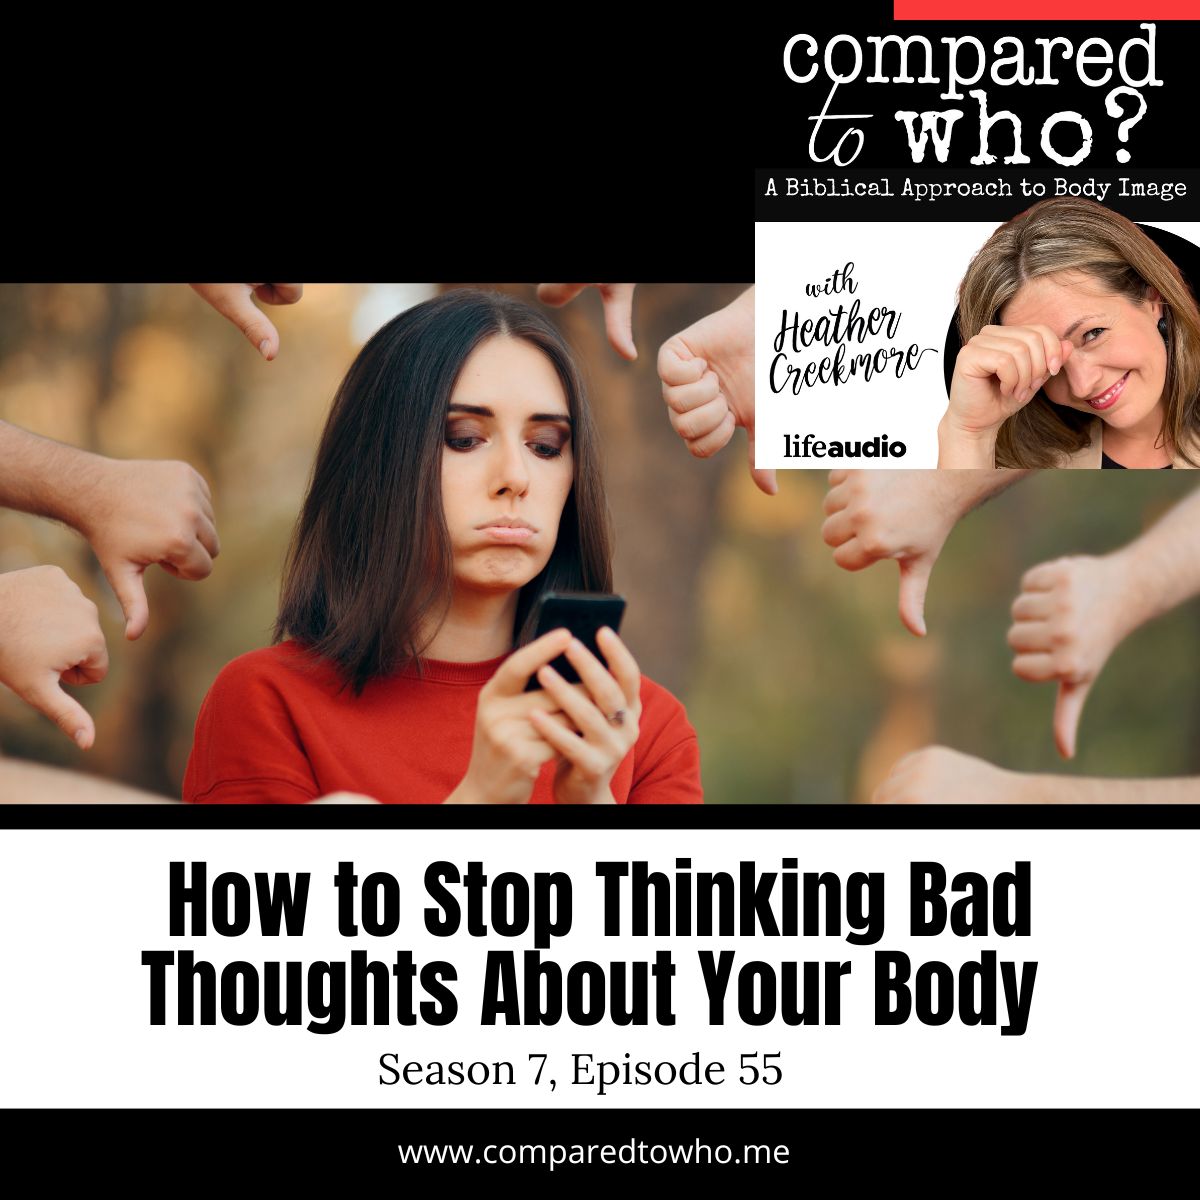 How to Stop Thinking Bad Thoughts About Your Body